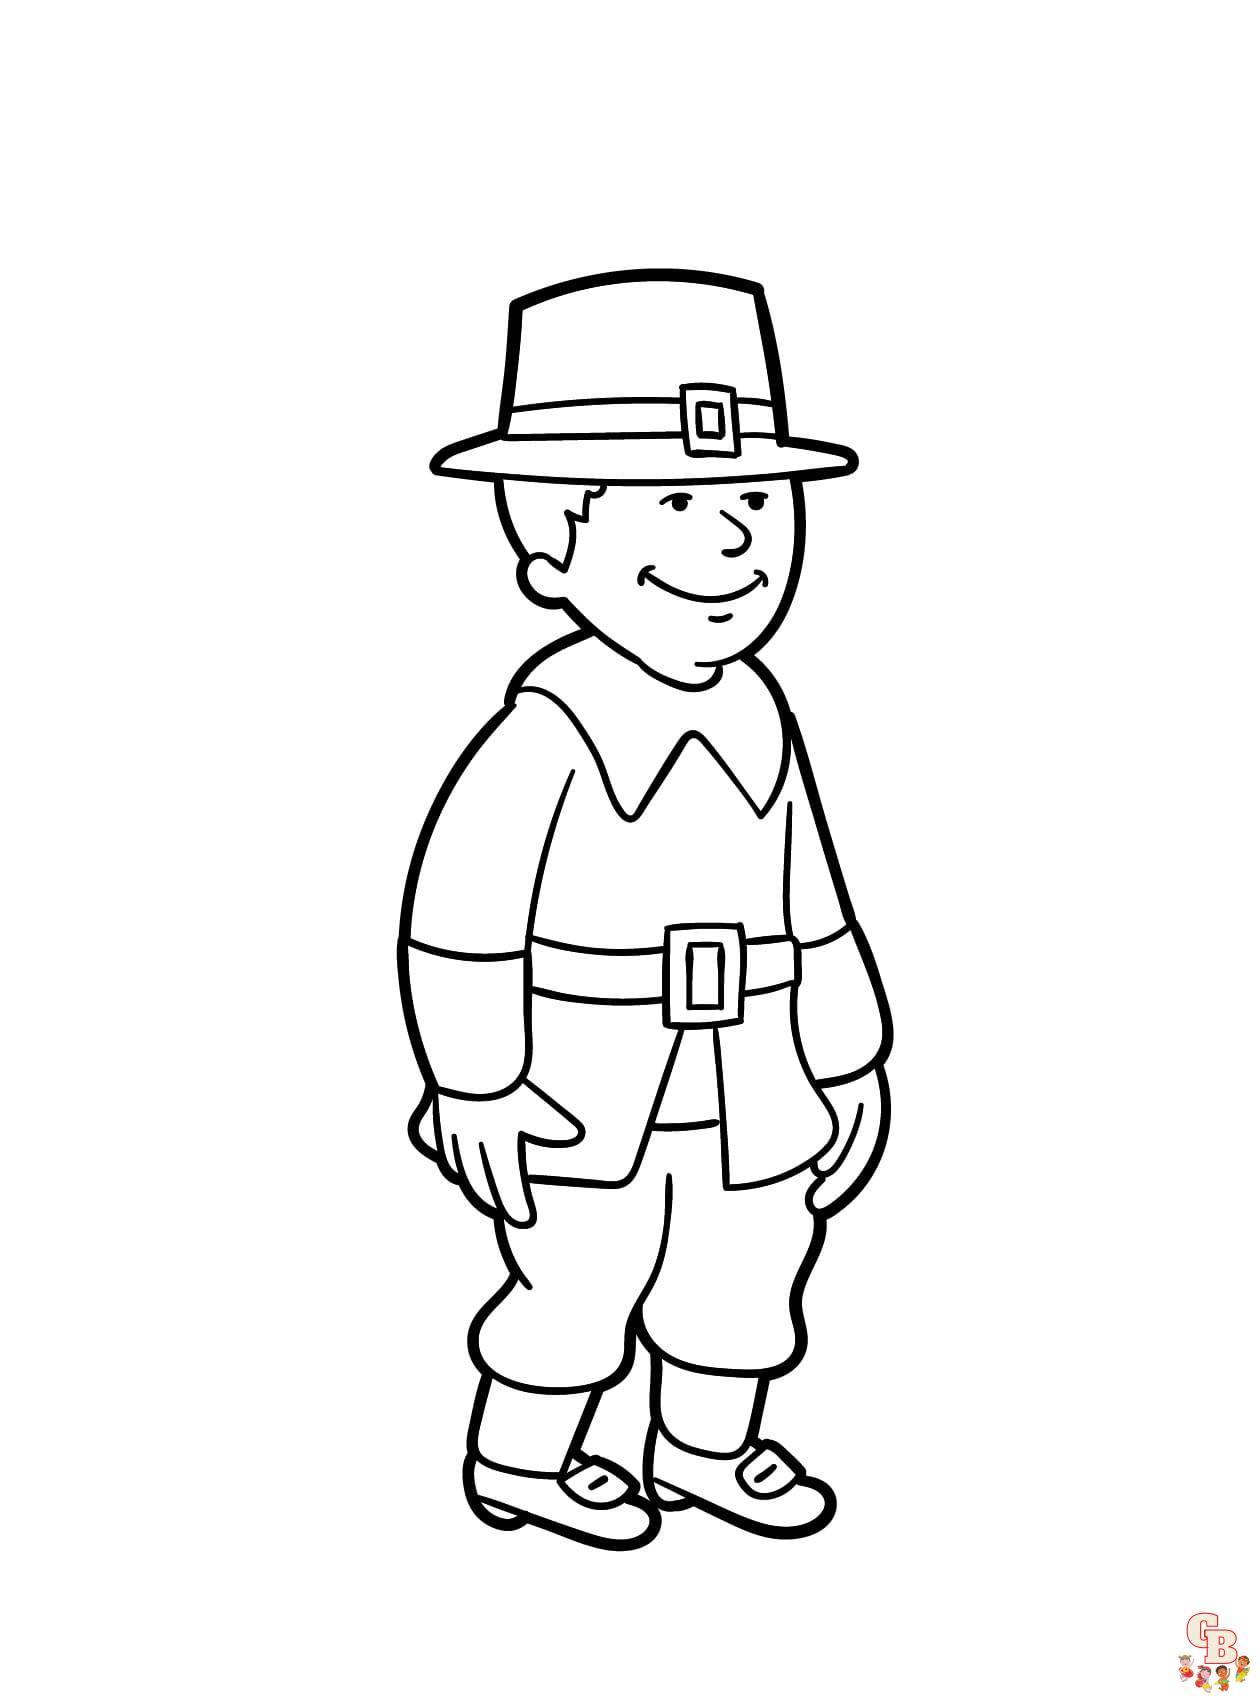 Pilgrim coloring pages easy